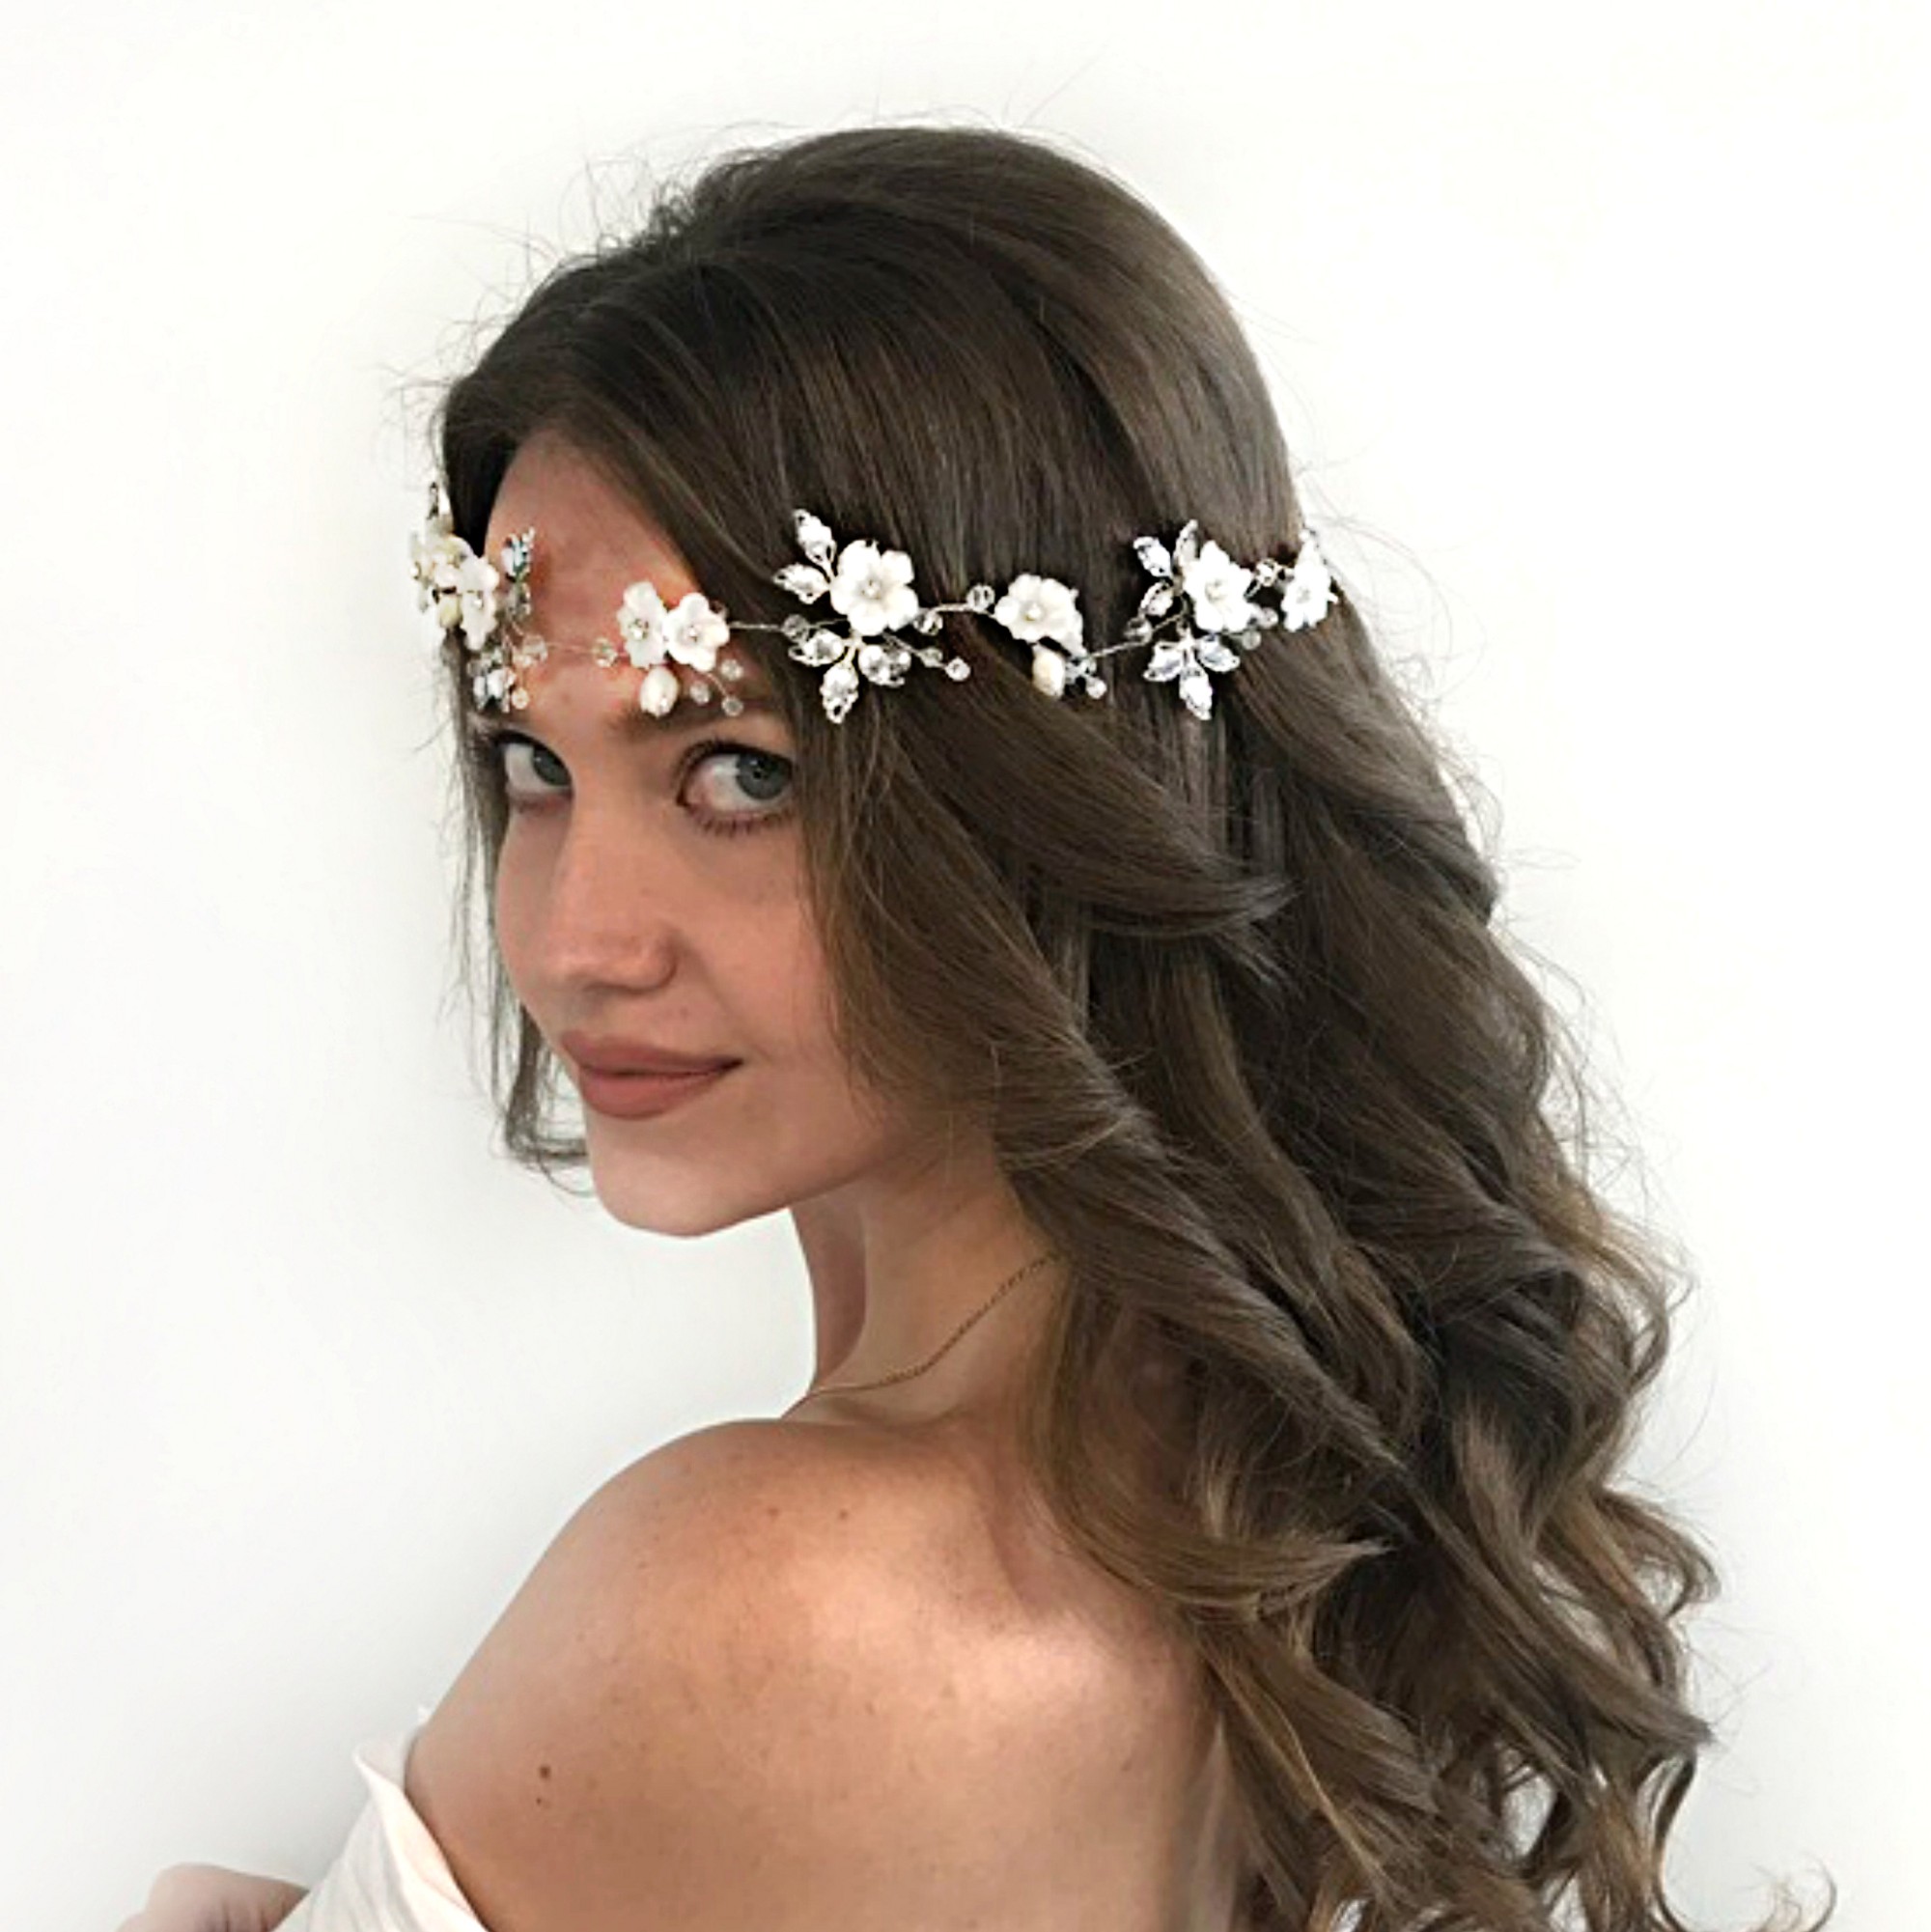 Pinterest Inspired Boho Braid with Flowers - Lizzie in Lace